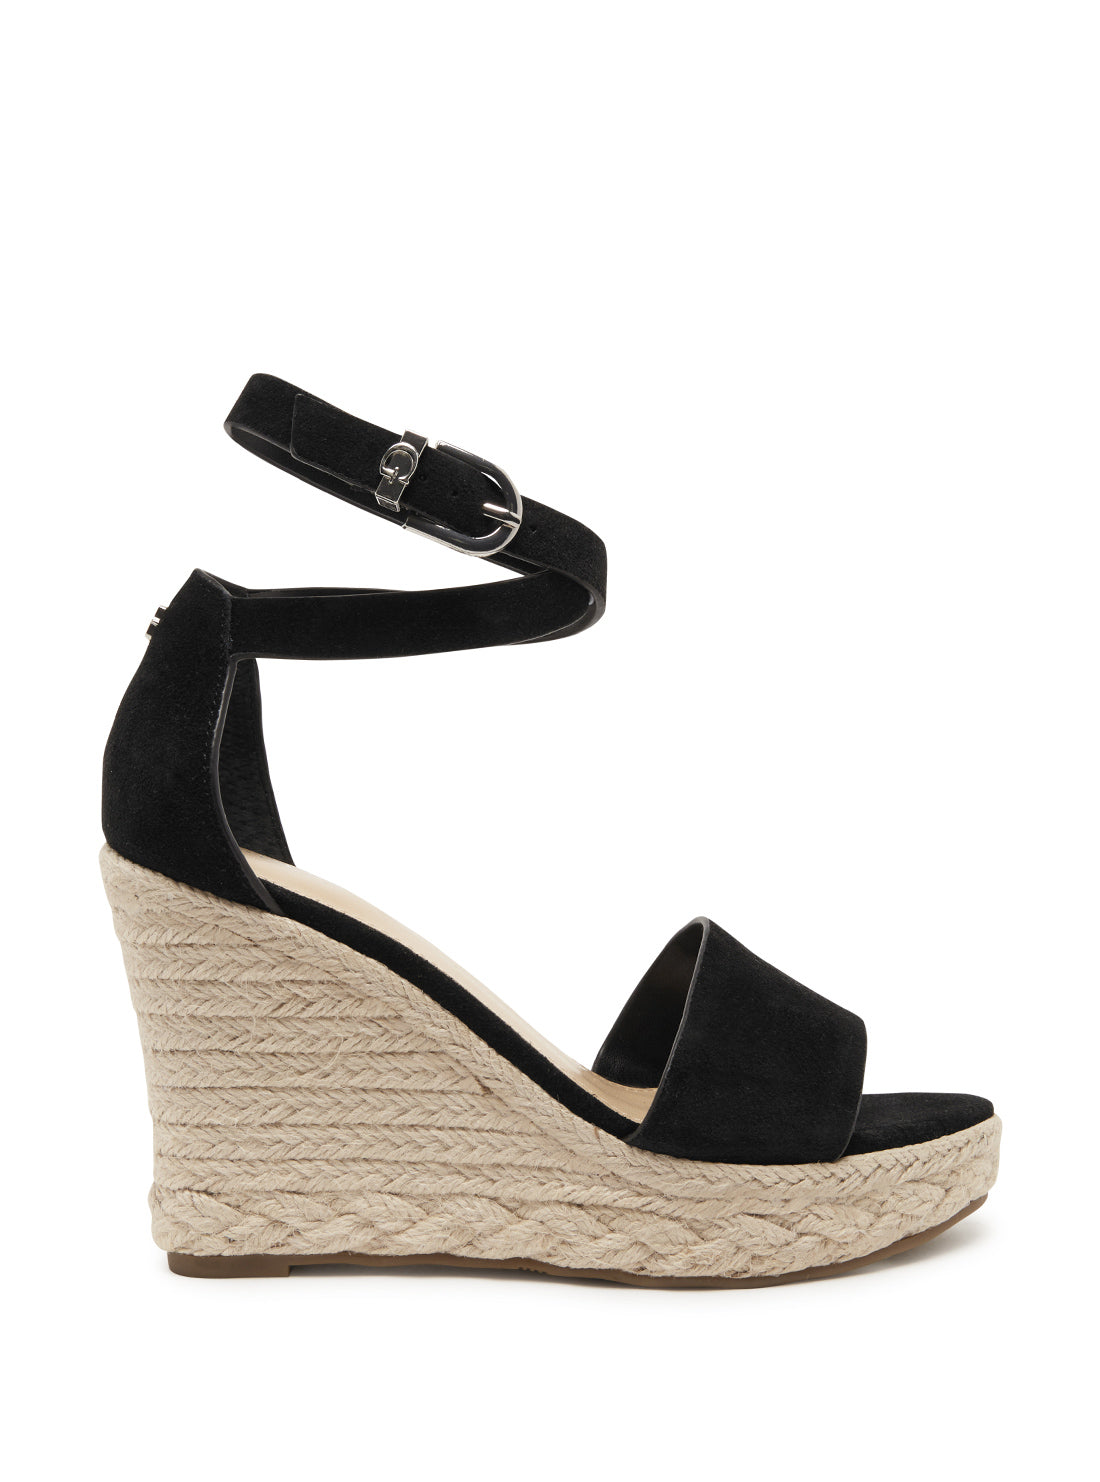 GUESS Womens Black Hidy Suede Espadrille Wedges HIDY Side View